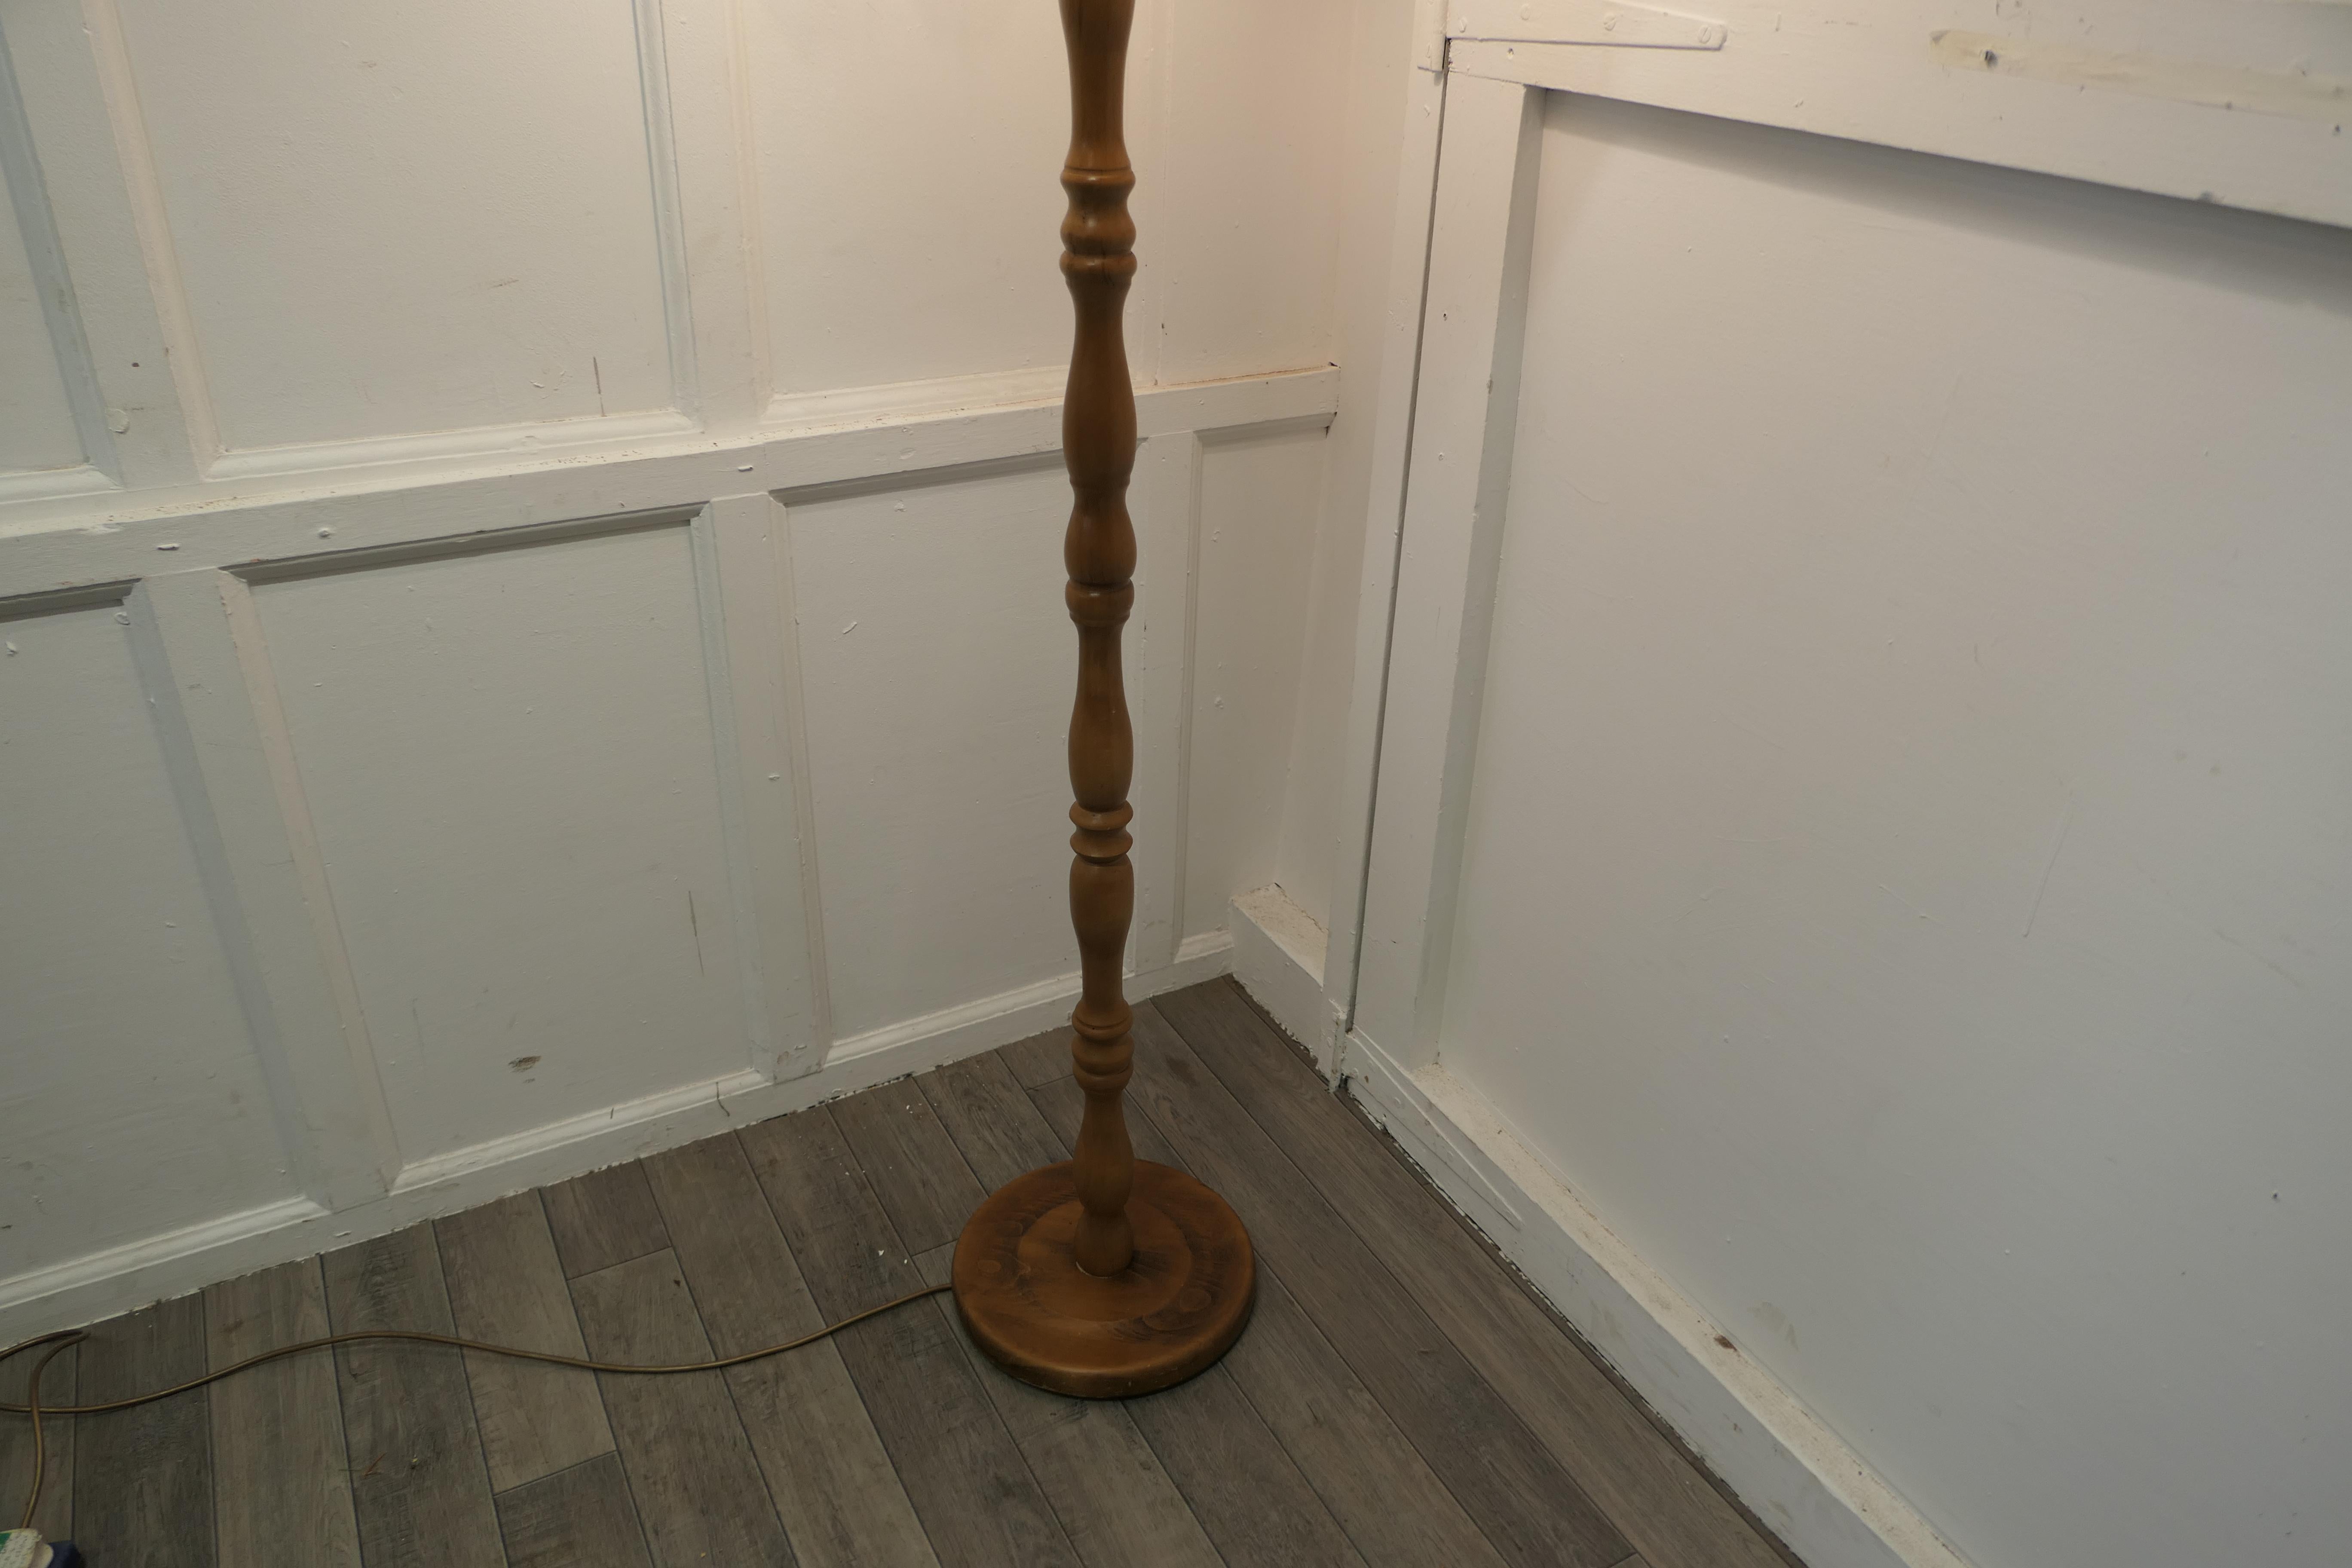 Turned beech floor standing lamp

A skilfully turned piece, this lamp stands on a turned wooden base, it is in good condition, the wiring seems to be new and is working
The lamp comes with an oval shade, this can be included if requested at the